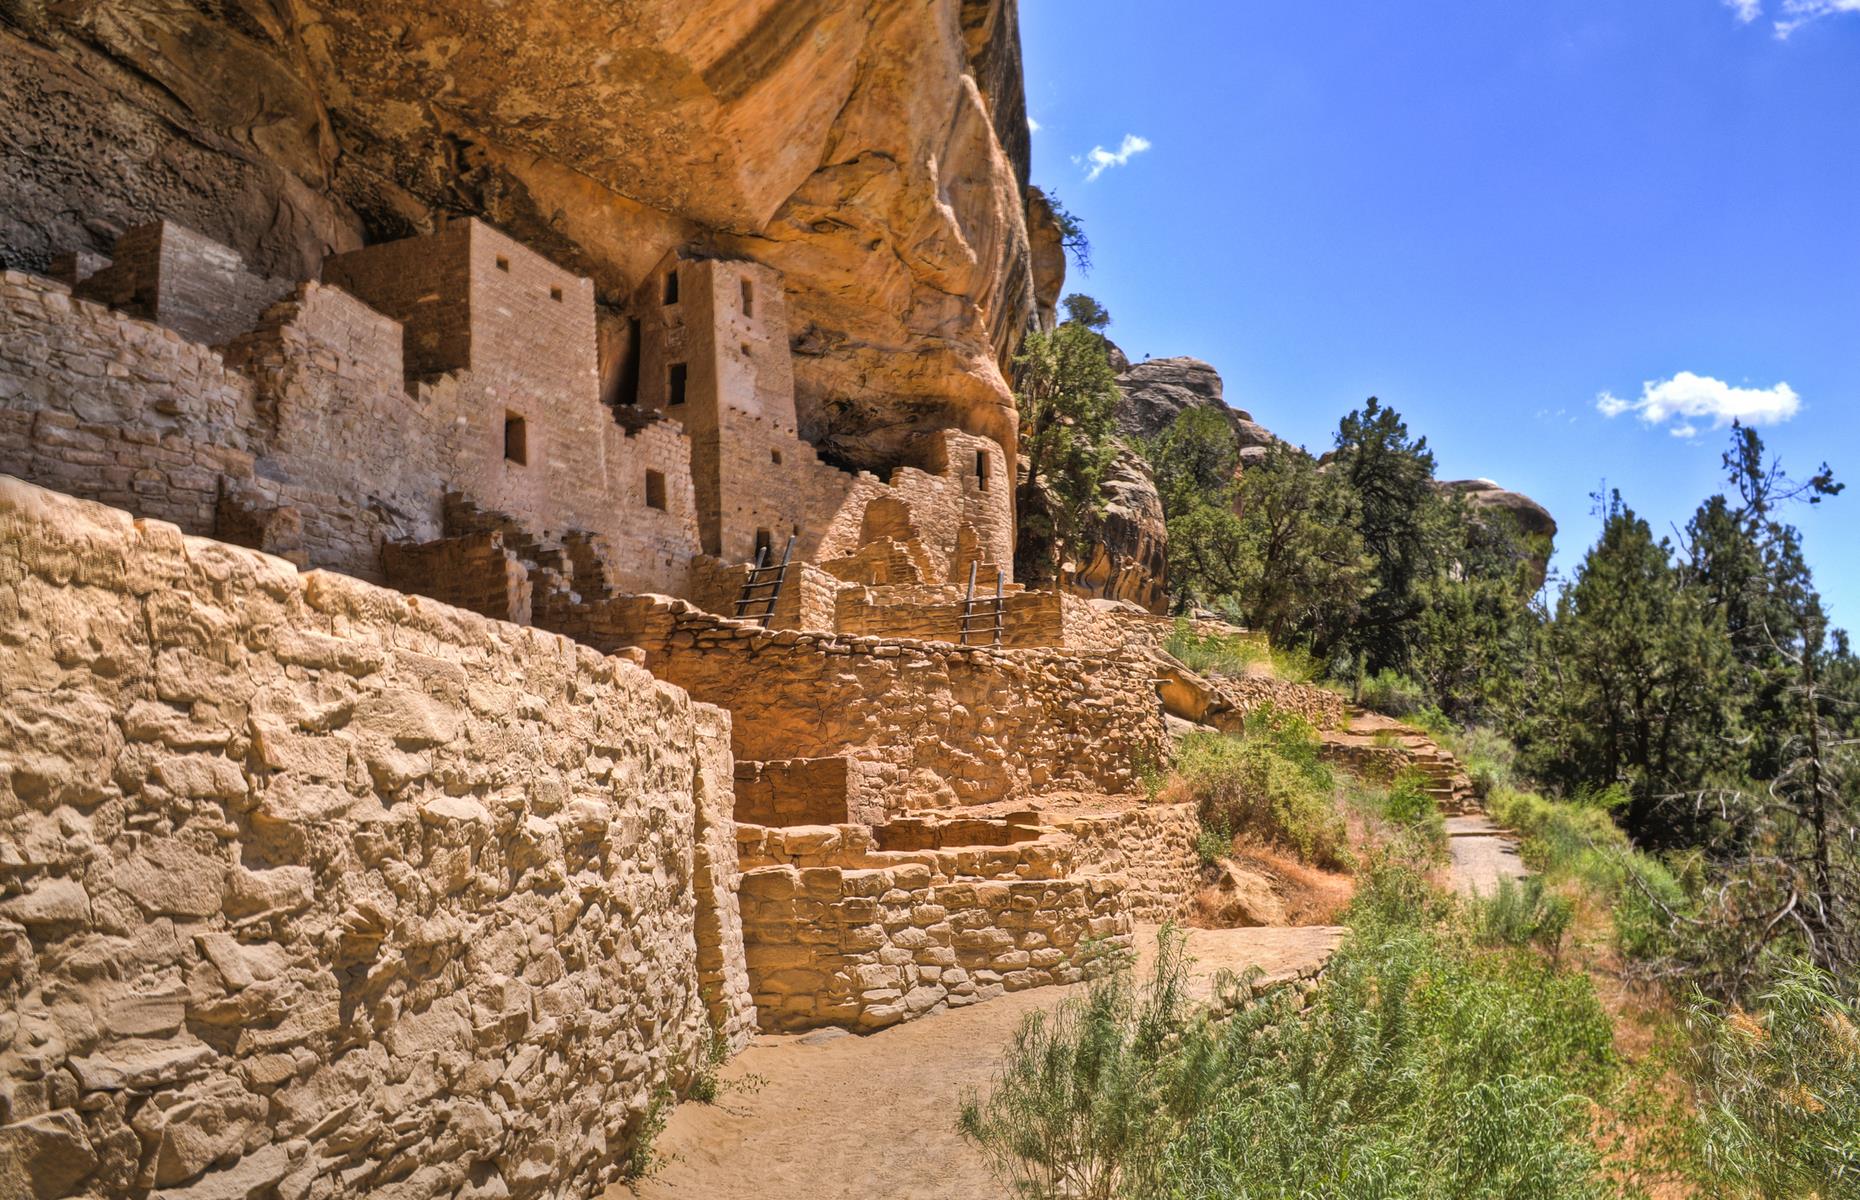 <p>You could be forgiven for mistaking these intricate rooms, carved into the cliffside in <a href="https://www.nps.gov/meve/index.htm">Mesa Verde National Park</a>, for a modern art installation. The Ancestral Puebloan ruin is actually believed to have been built between 1190 and 1260 and is North America’s largest known cliff dwelling. You can <a href="https://www.nps.gov/meve/planyourvisit/tour_tickets.htm">tour the structure</a>, made up of 150 rooms and underground chambers, with a park ranger.</p>  <p><strong><a href="https://www.loveexploring.com/galleries/87937/incredible-ancient-ruins-in-the-usa-you-probably-didnt-know-existed?page=1">Discover more ancient ruins in the USA here</a></strong></p>